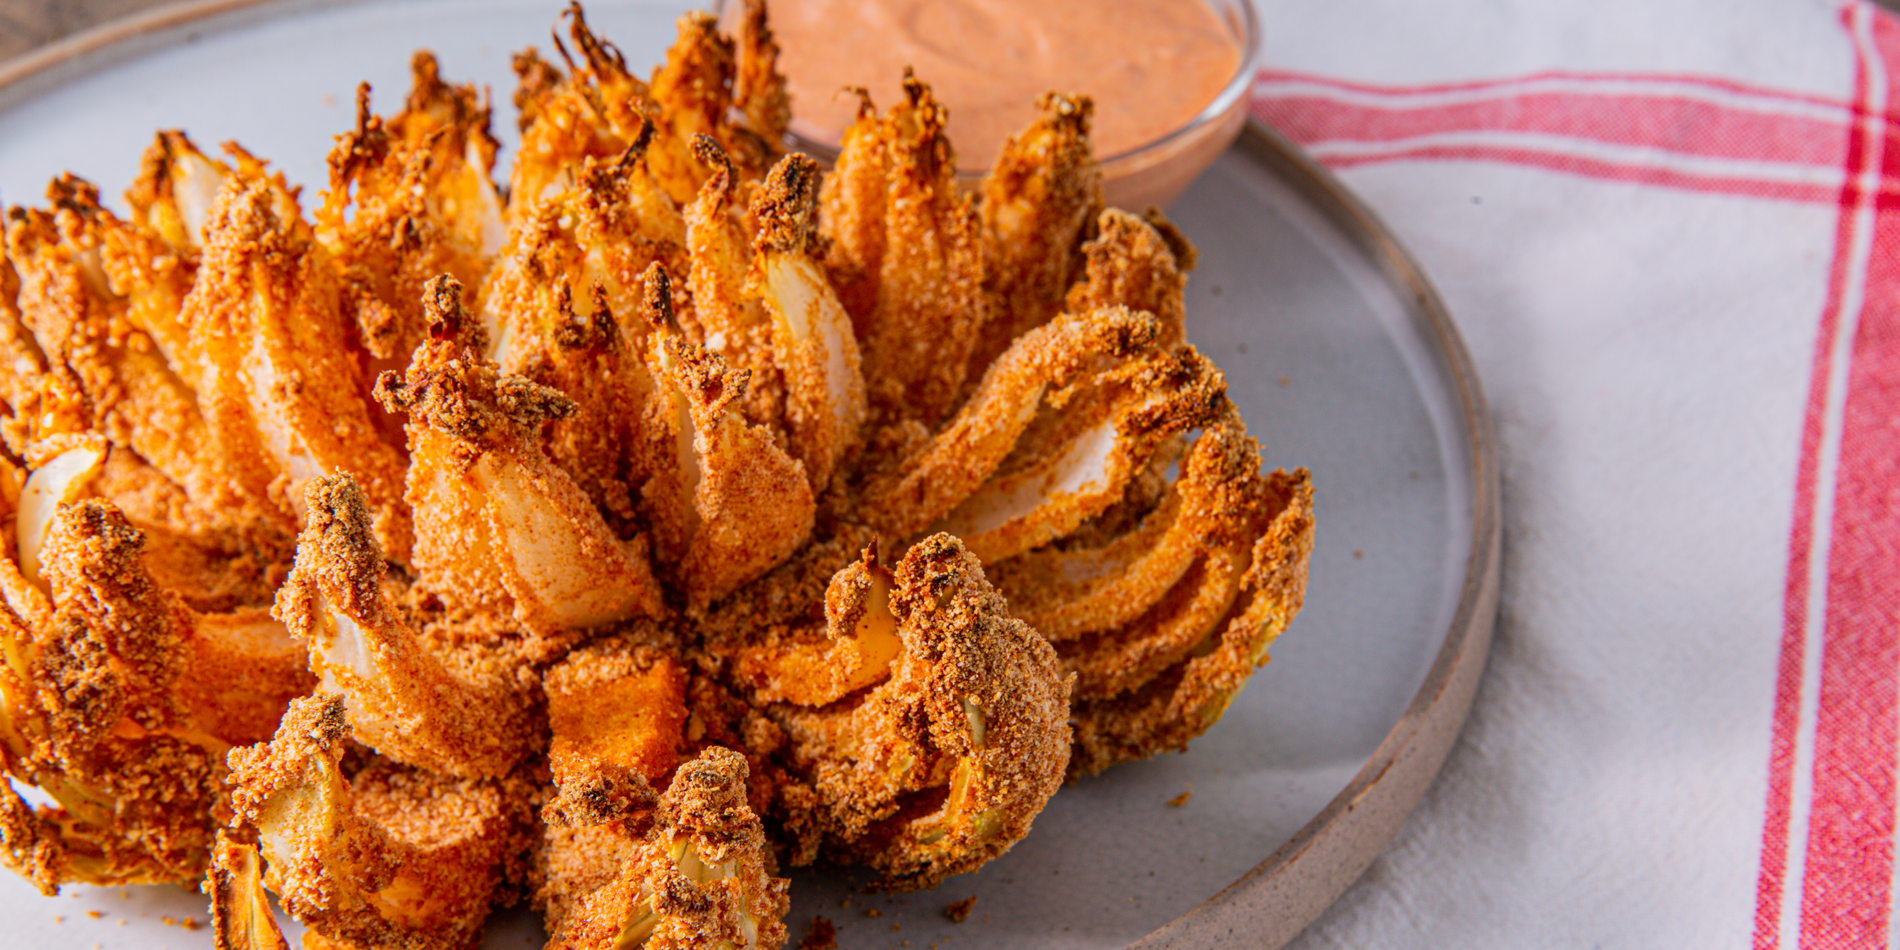 Best Air Fryer Blooming Onion Recipe How To Make Air Fryer Blooming Onion